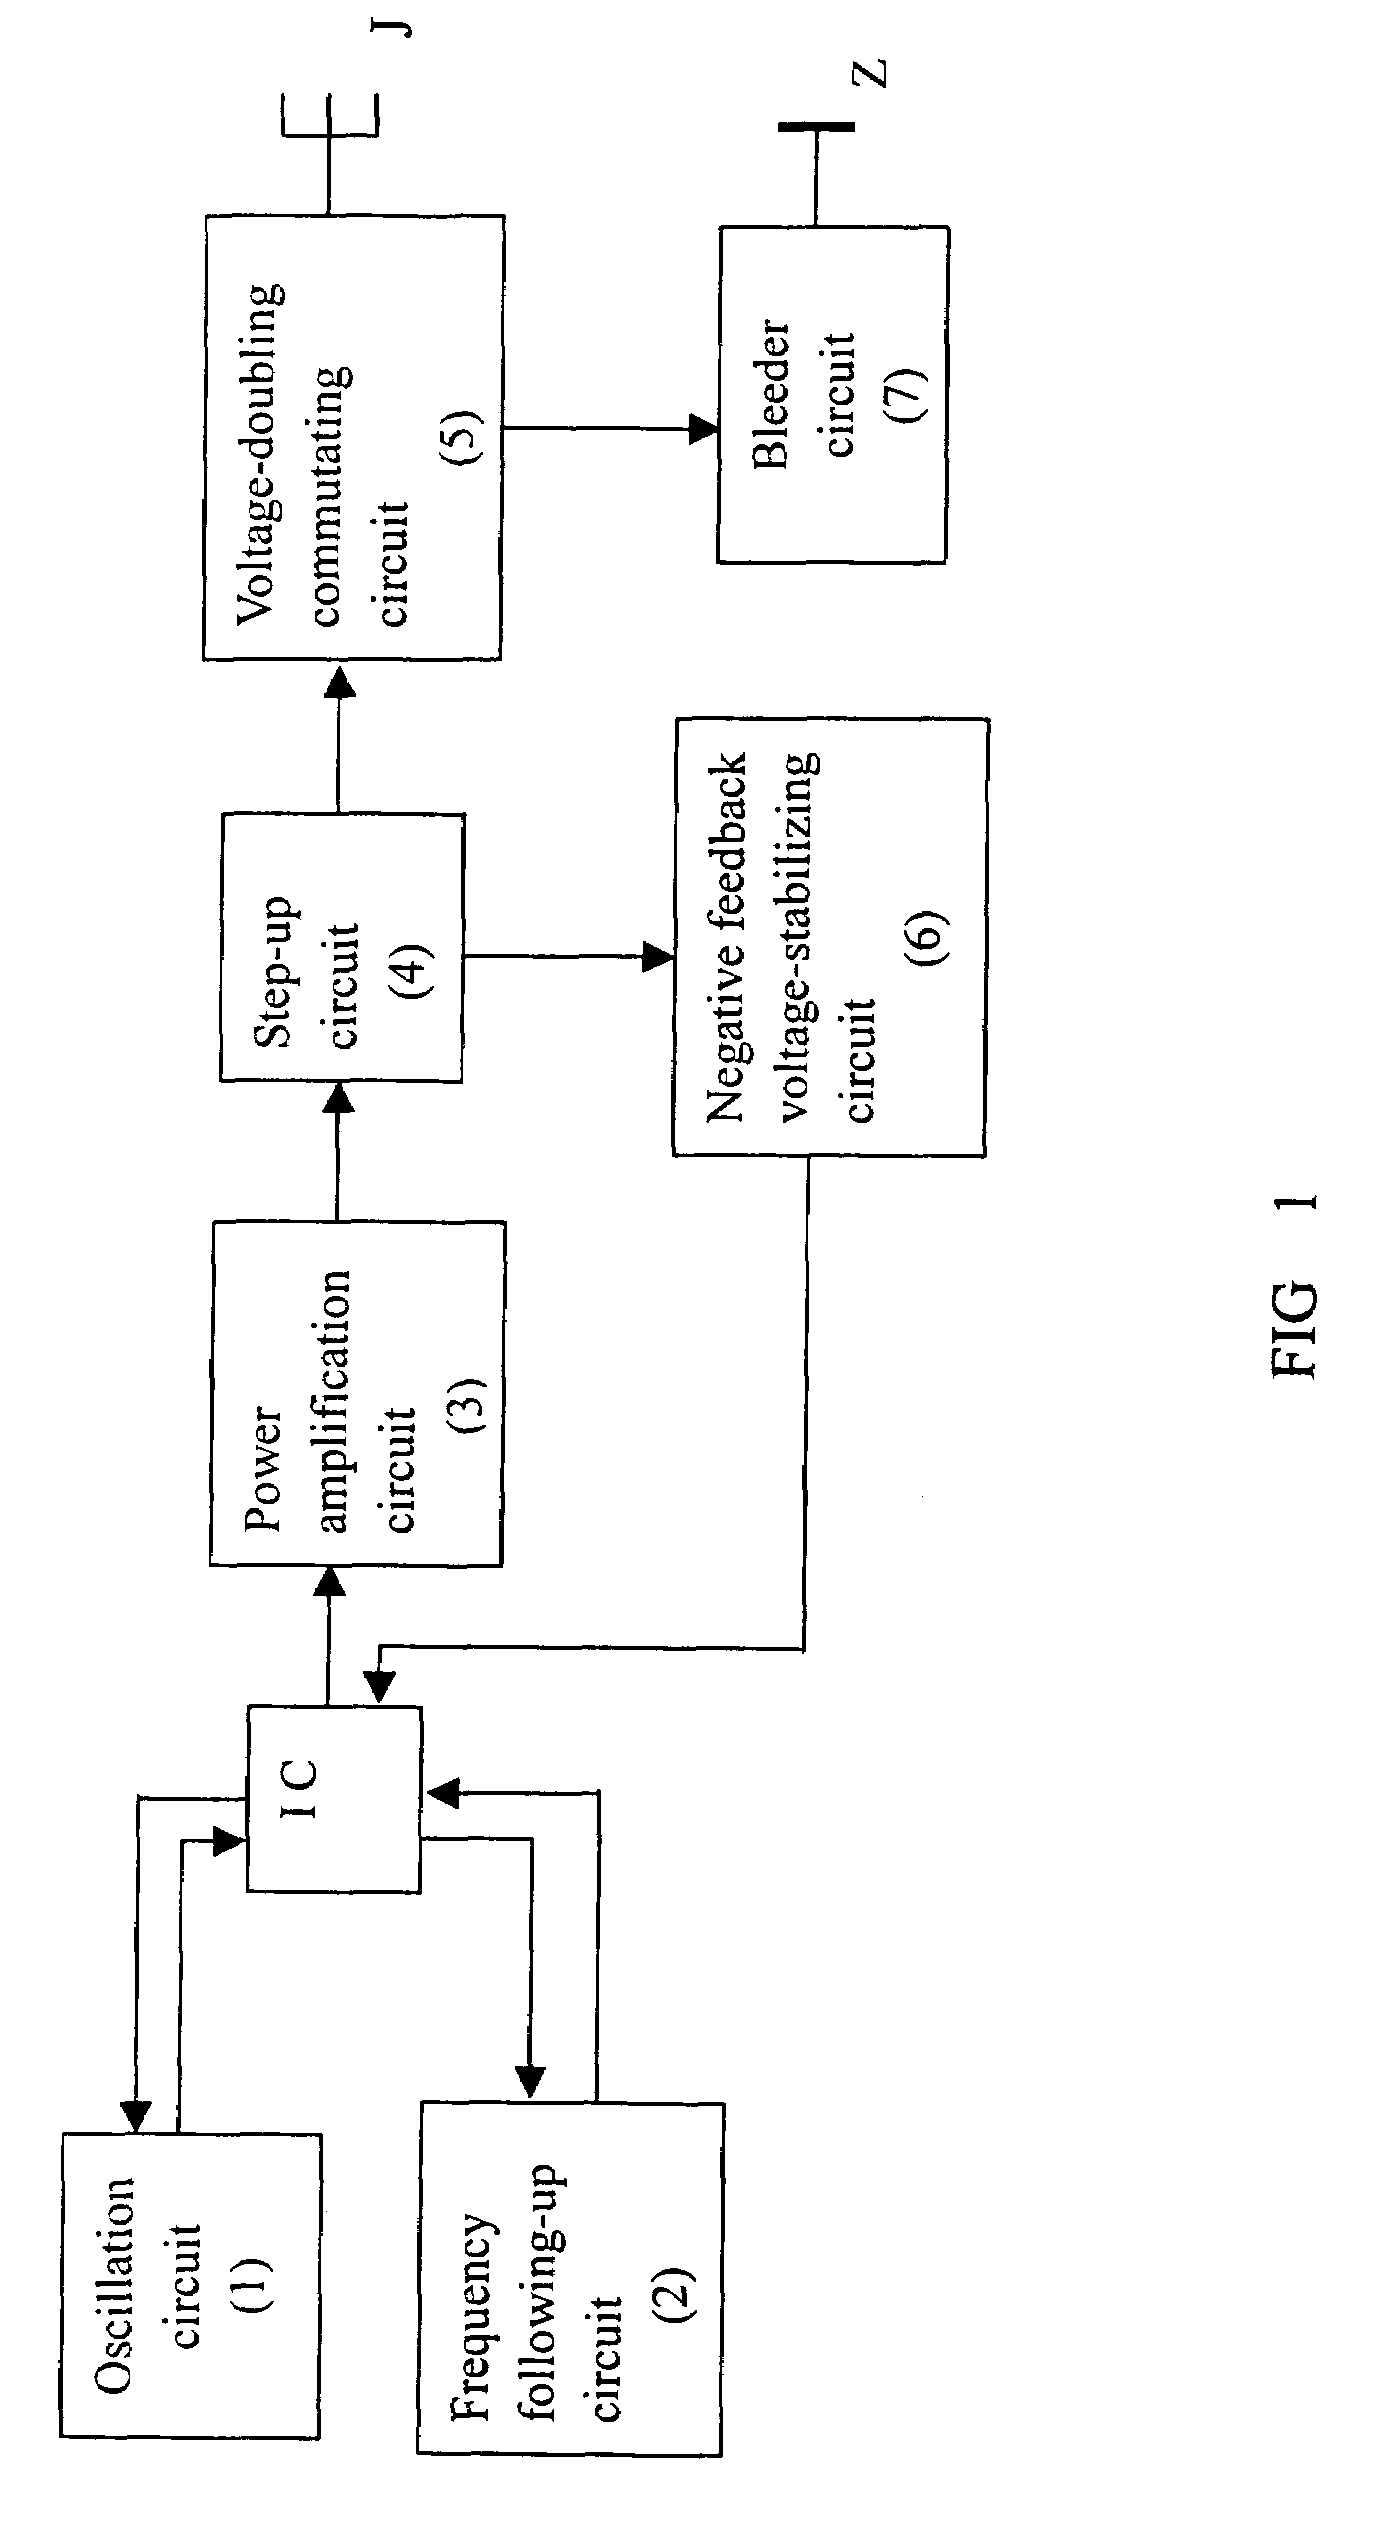 Piezoelectric anion generator controled by integrated circuit